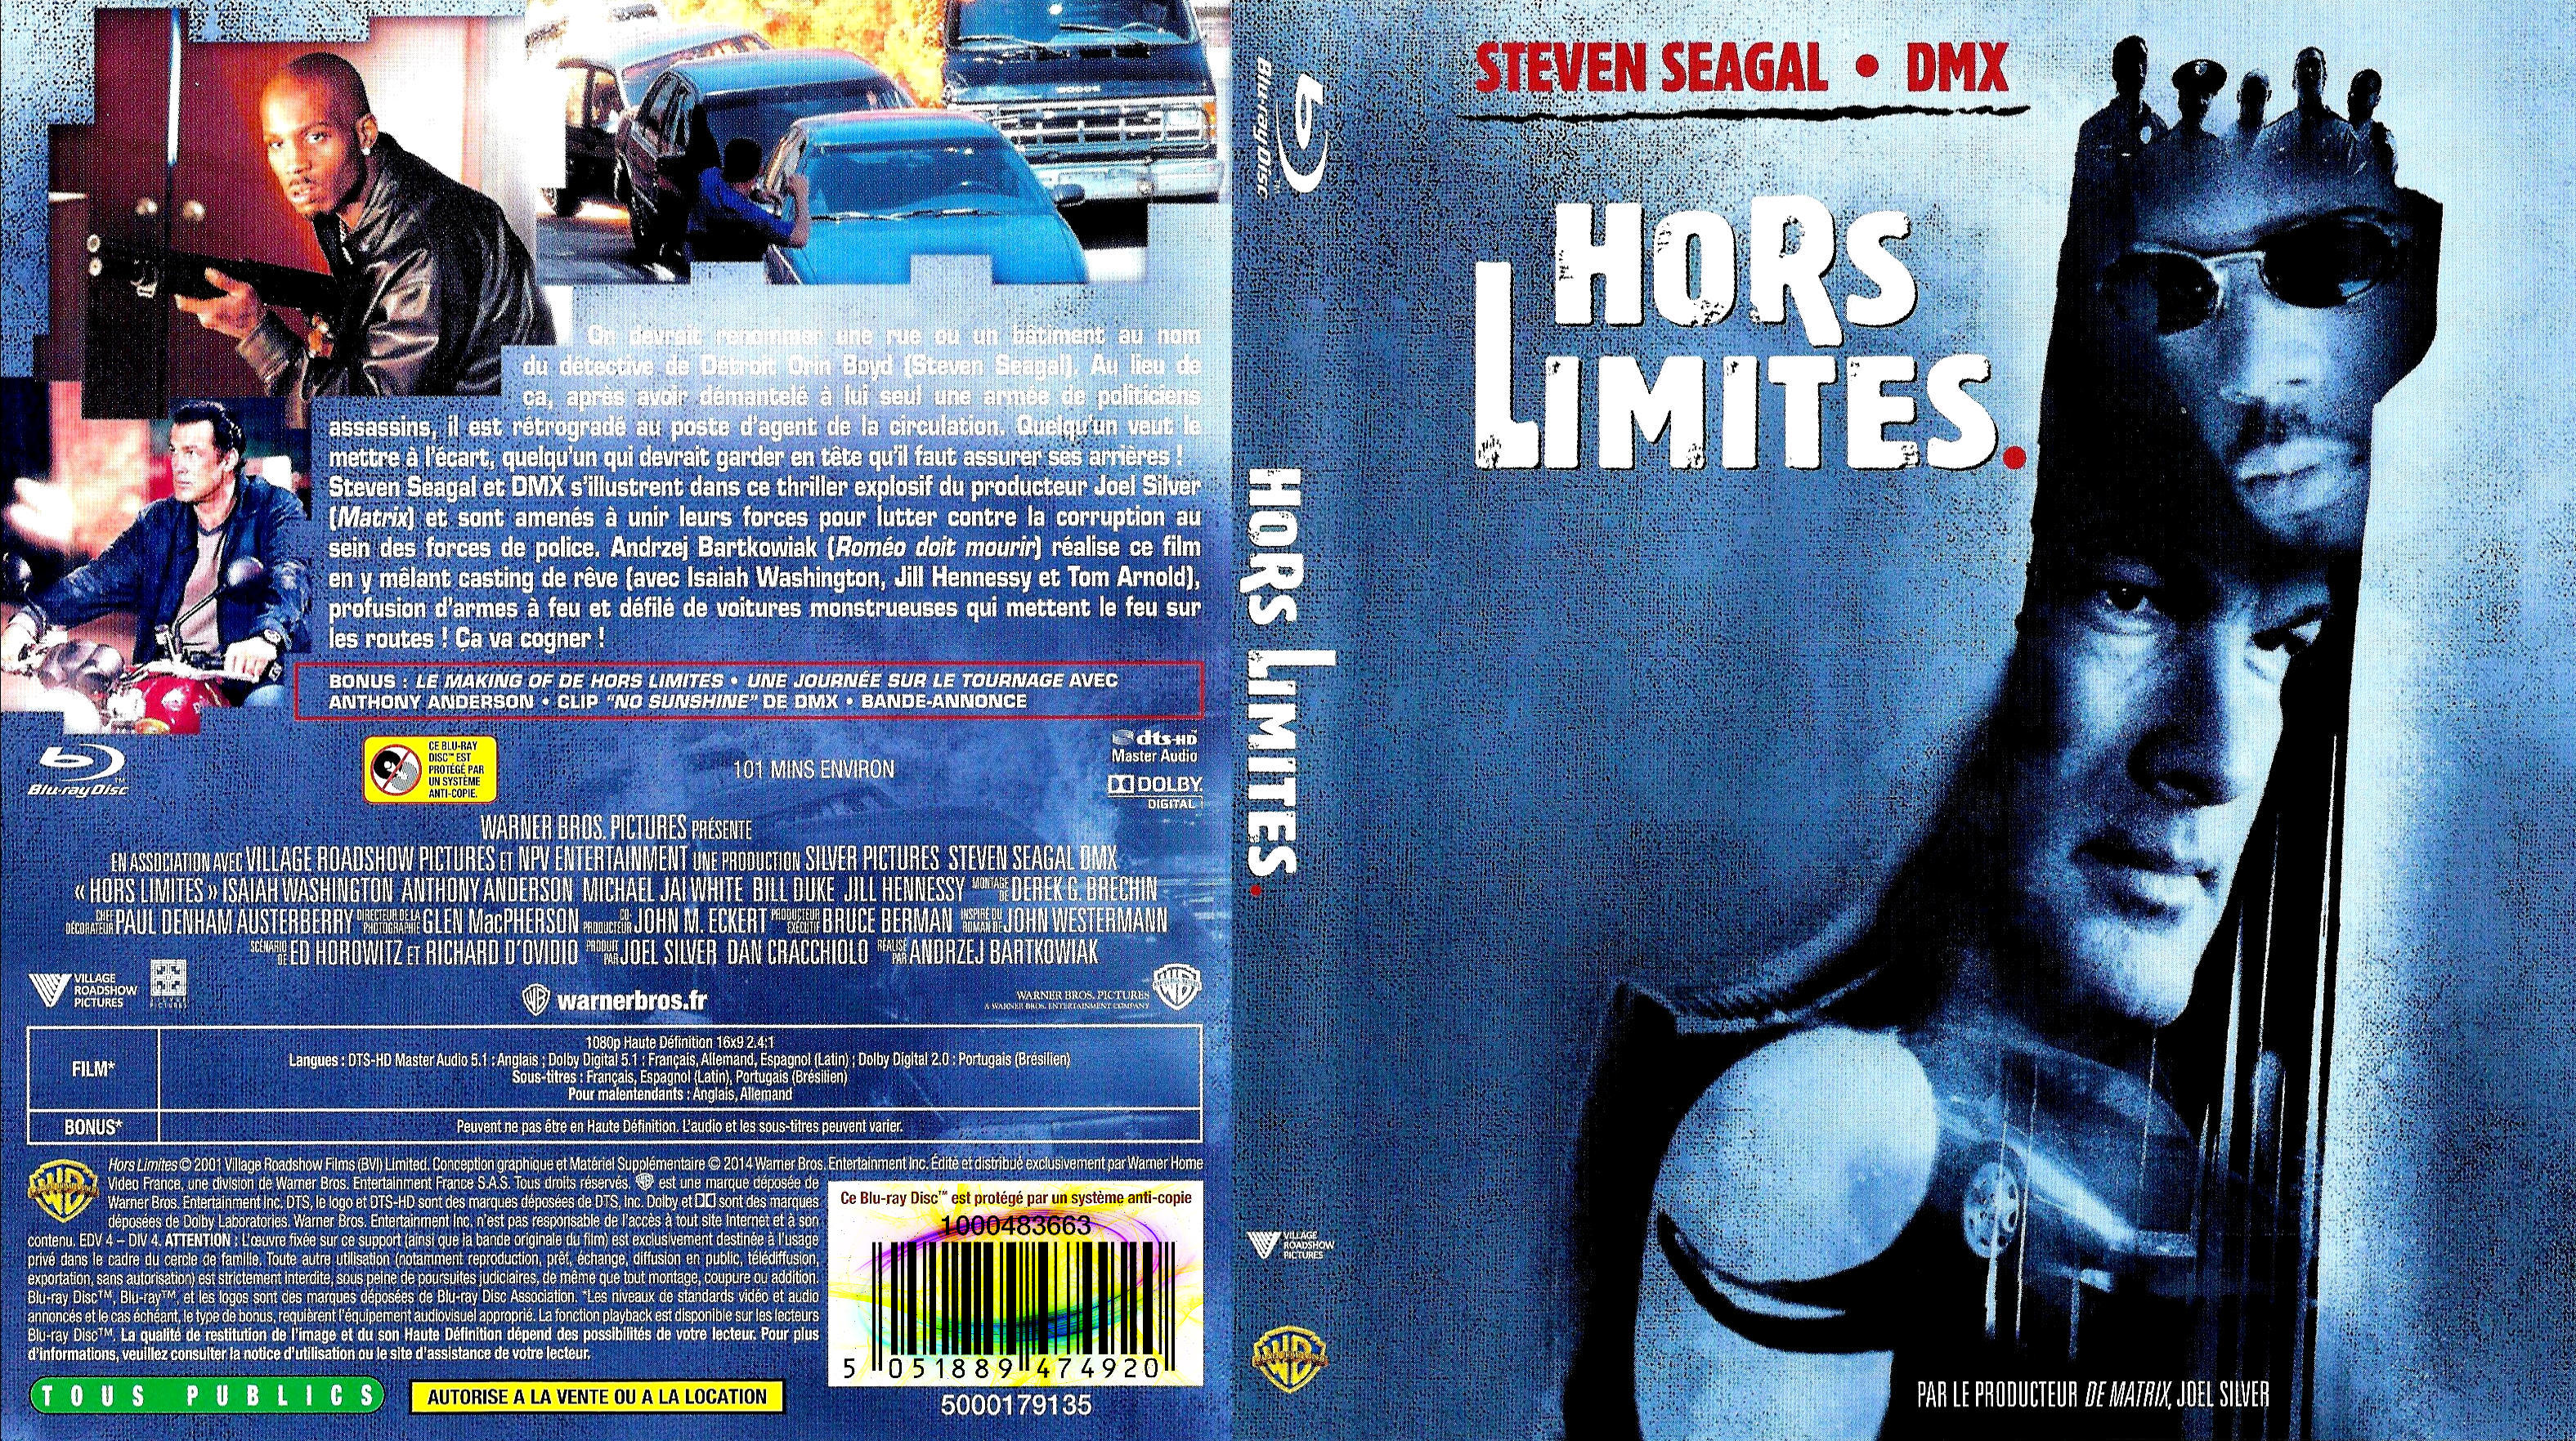 Jaquette DVD Hors limites (BLU-RAY)